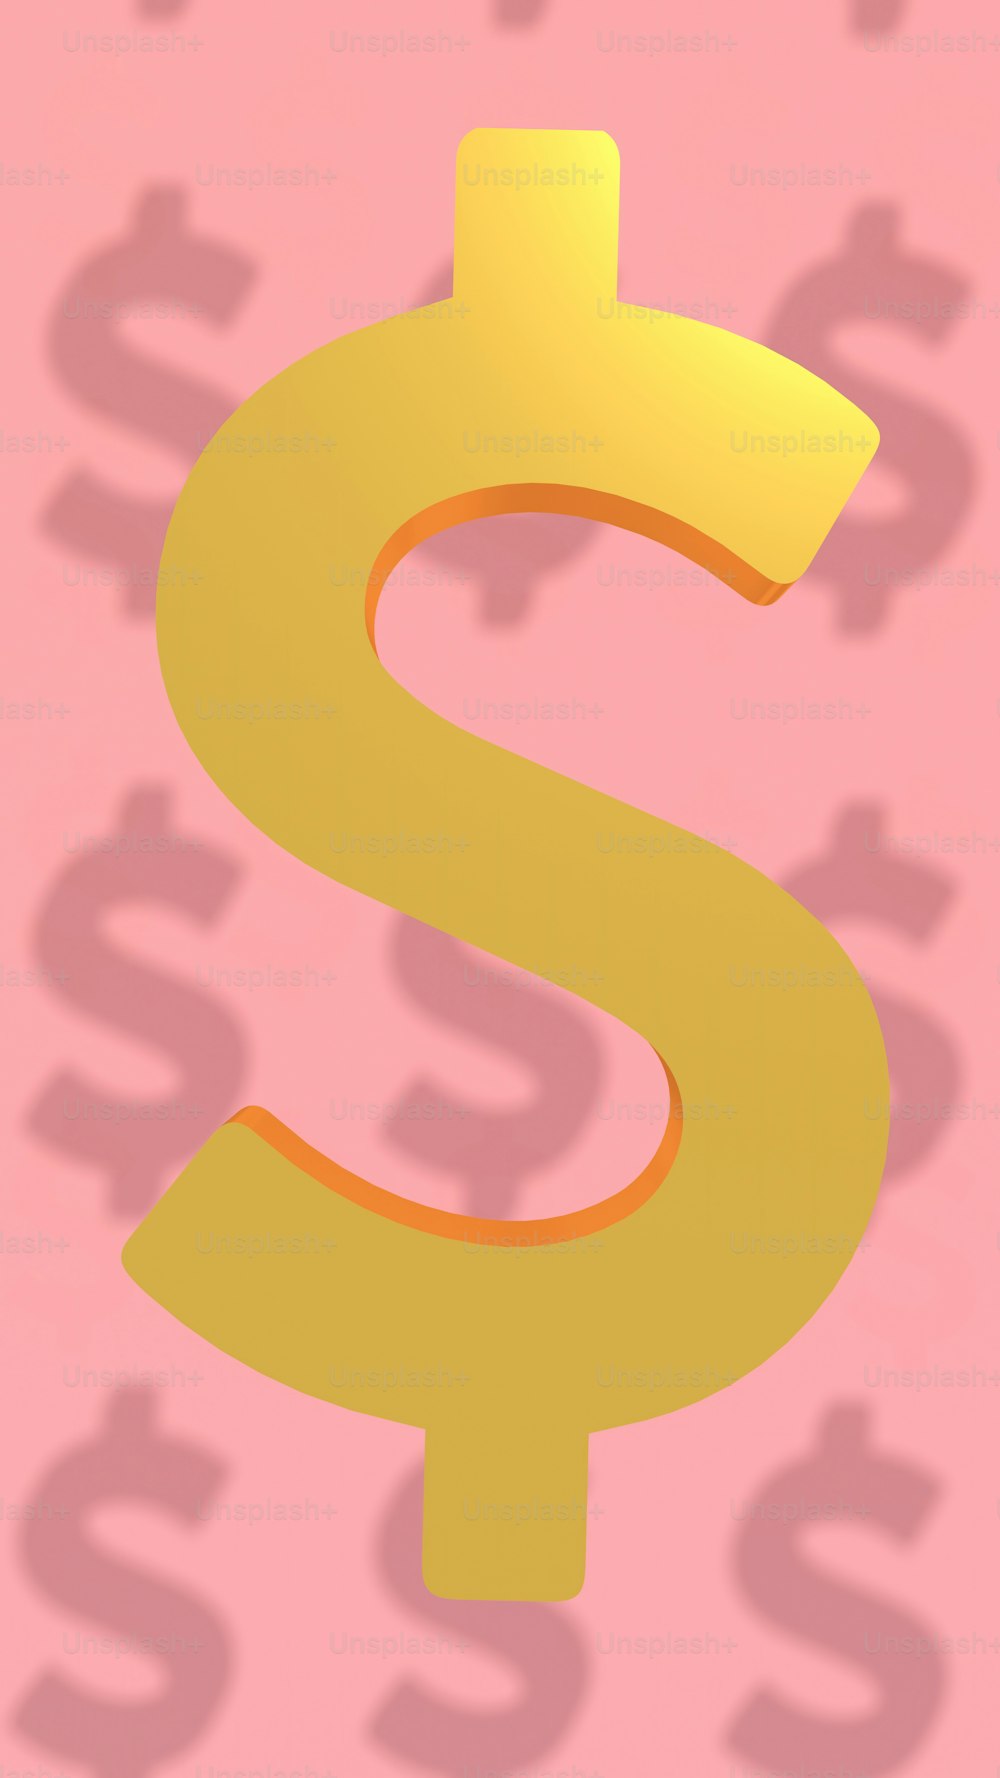 the shadow of a dollar sign on a pink background